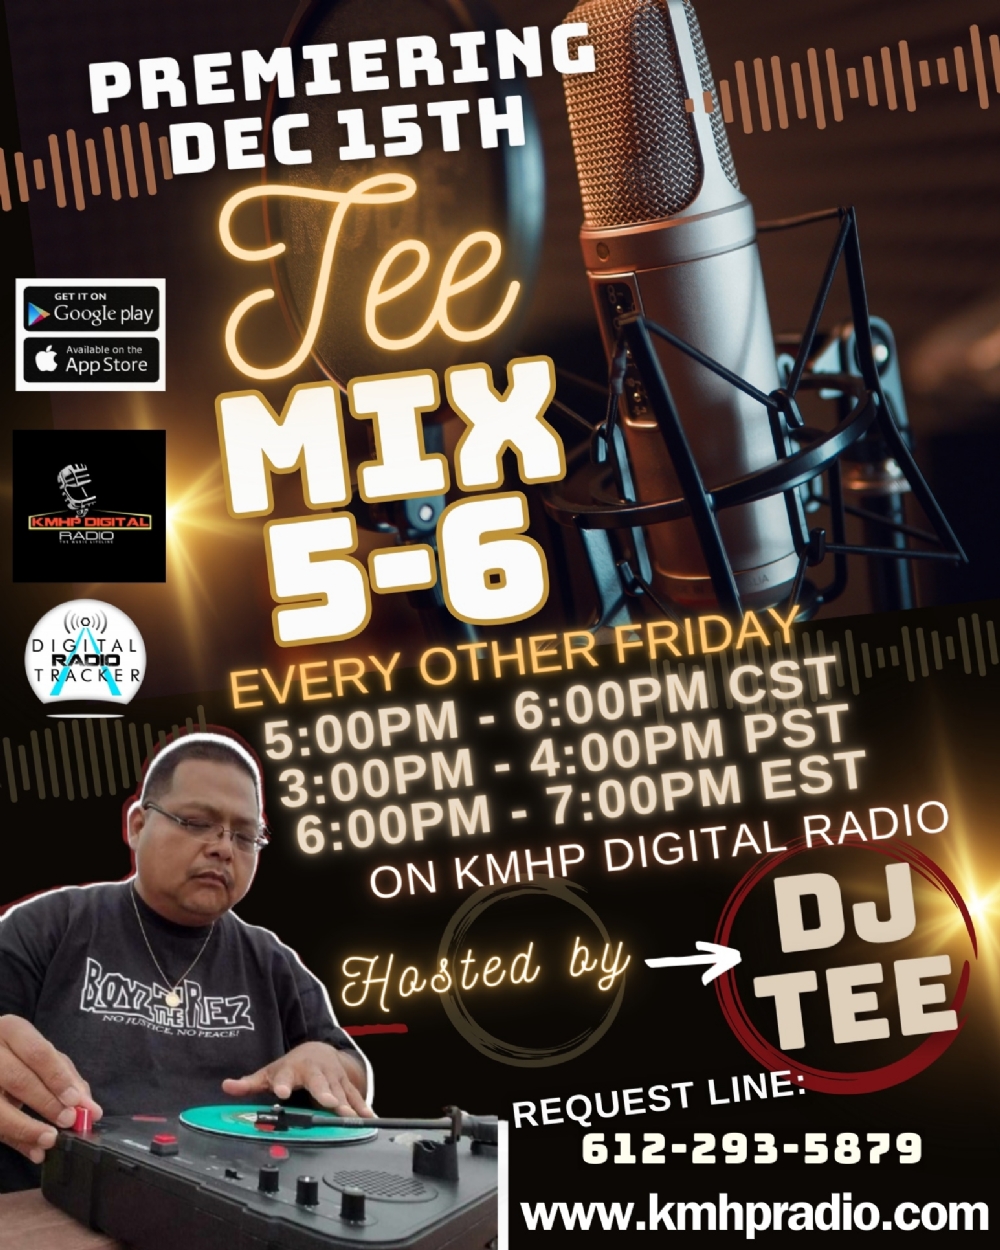 Dj TEE IS COMING TO MIXSHOW FRIDAYS 12/15/23